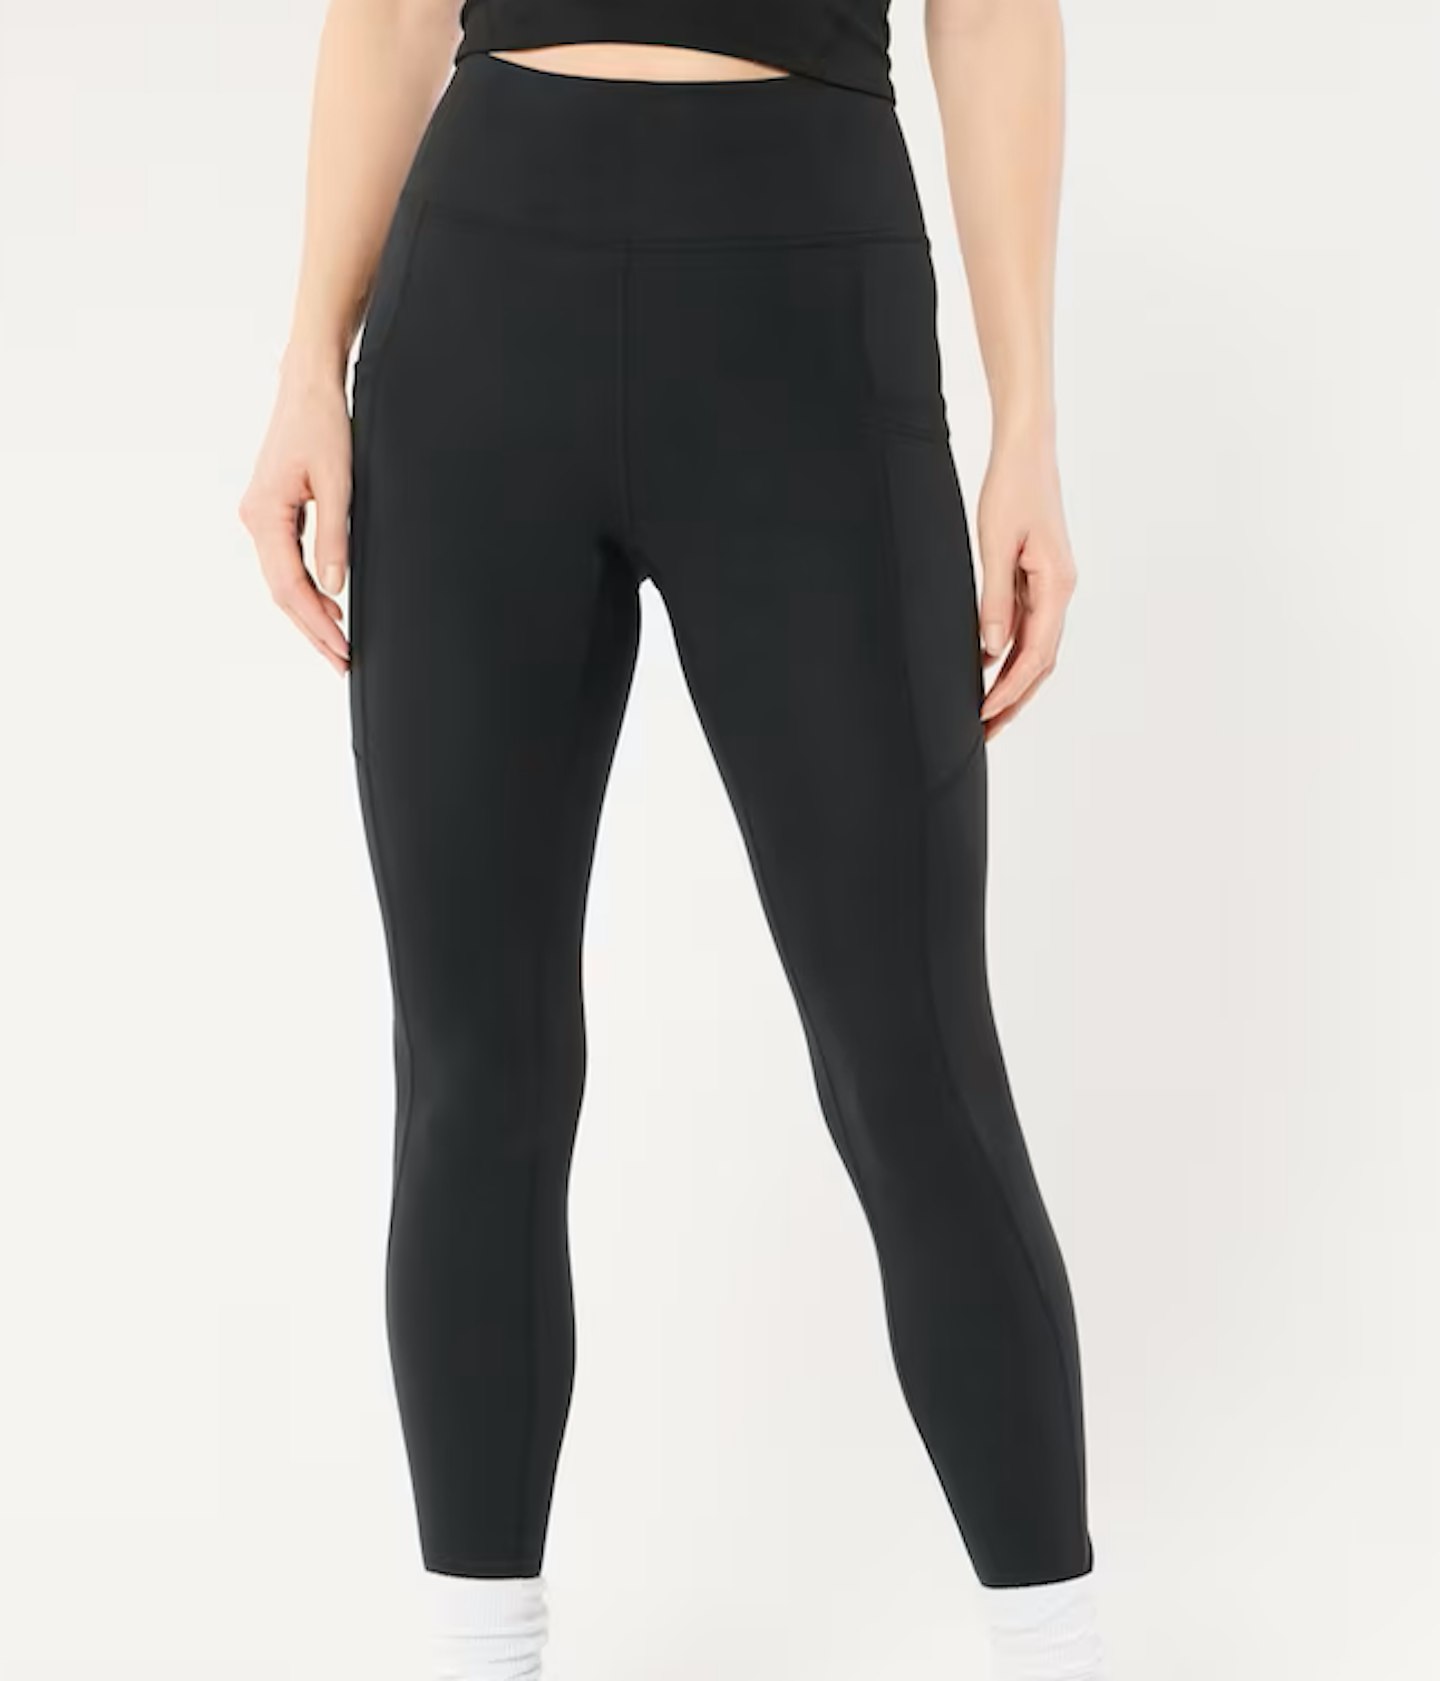 Gilly Hicks Recharge Leggings 